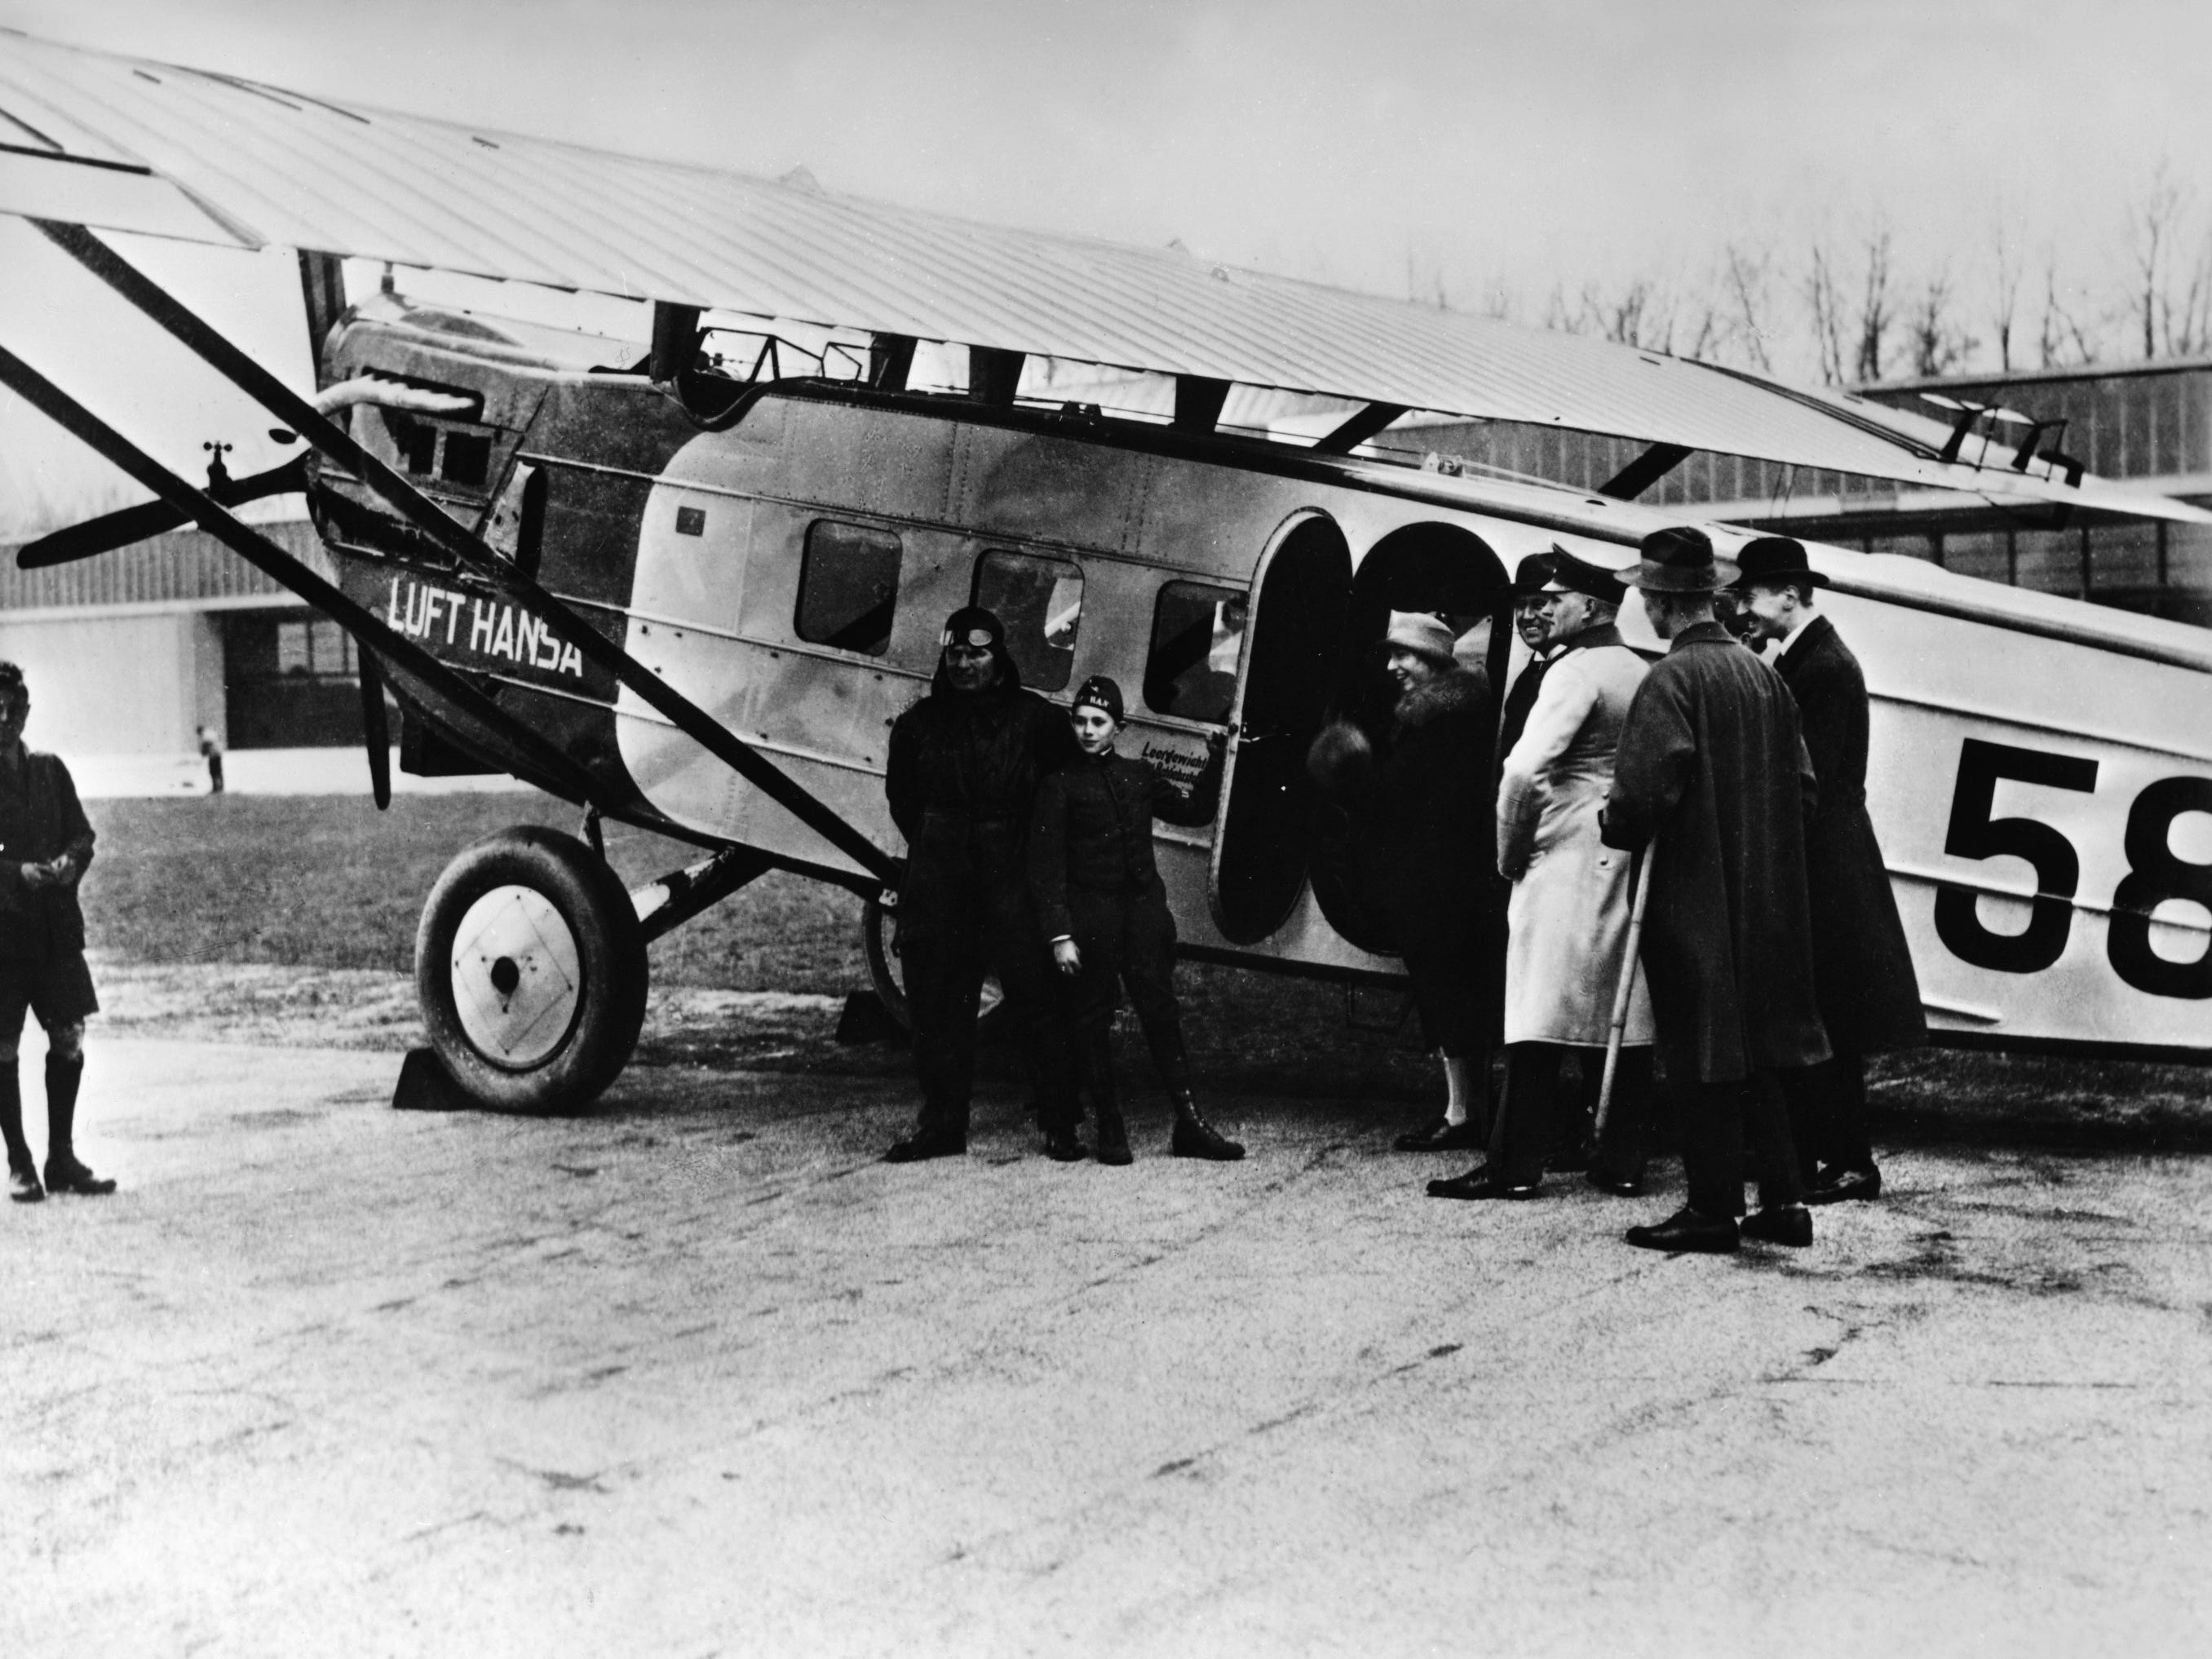 <p>Lufthansa began its official flight service in 1926, according to the airline's website.</p>